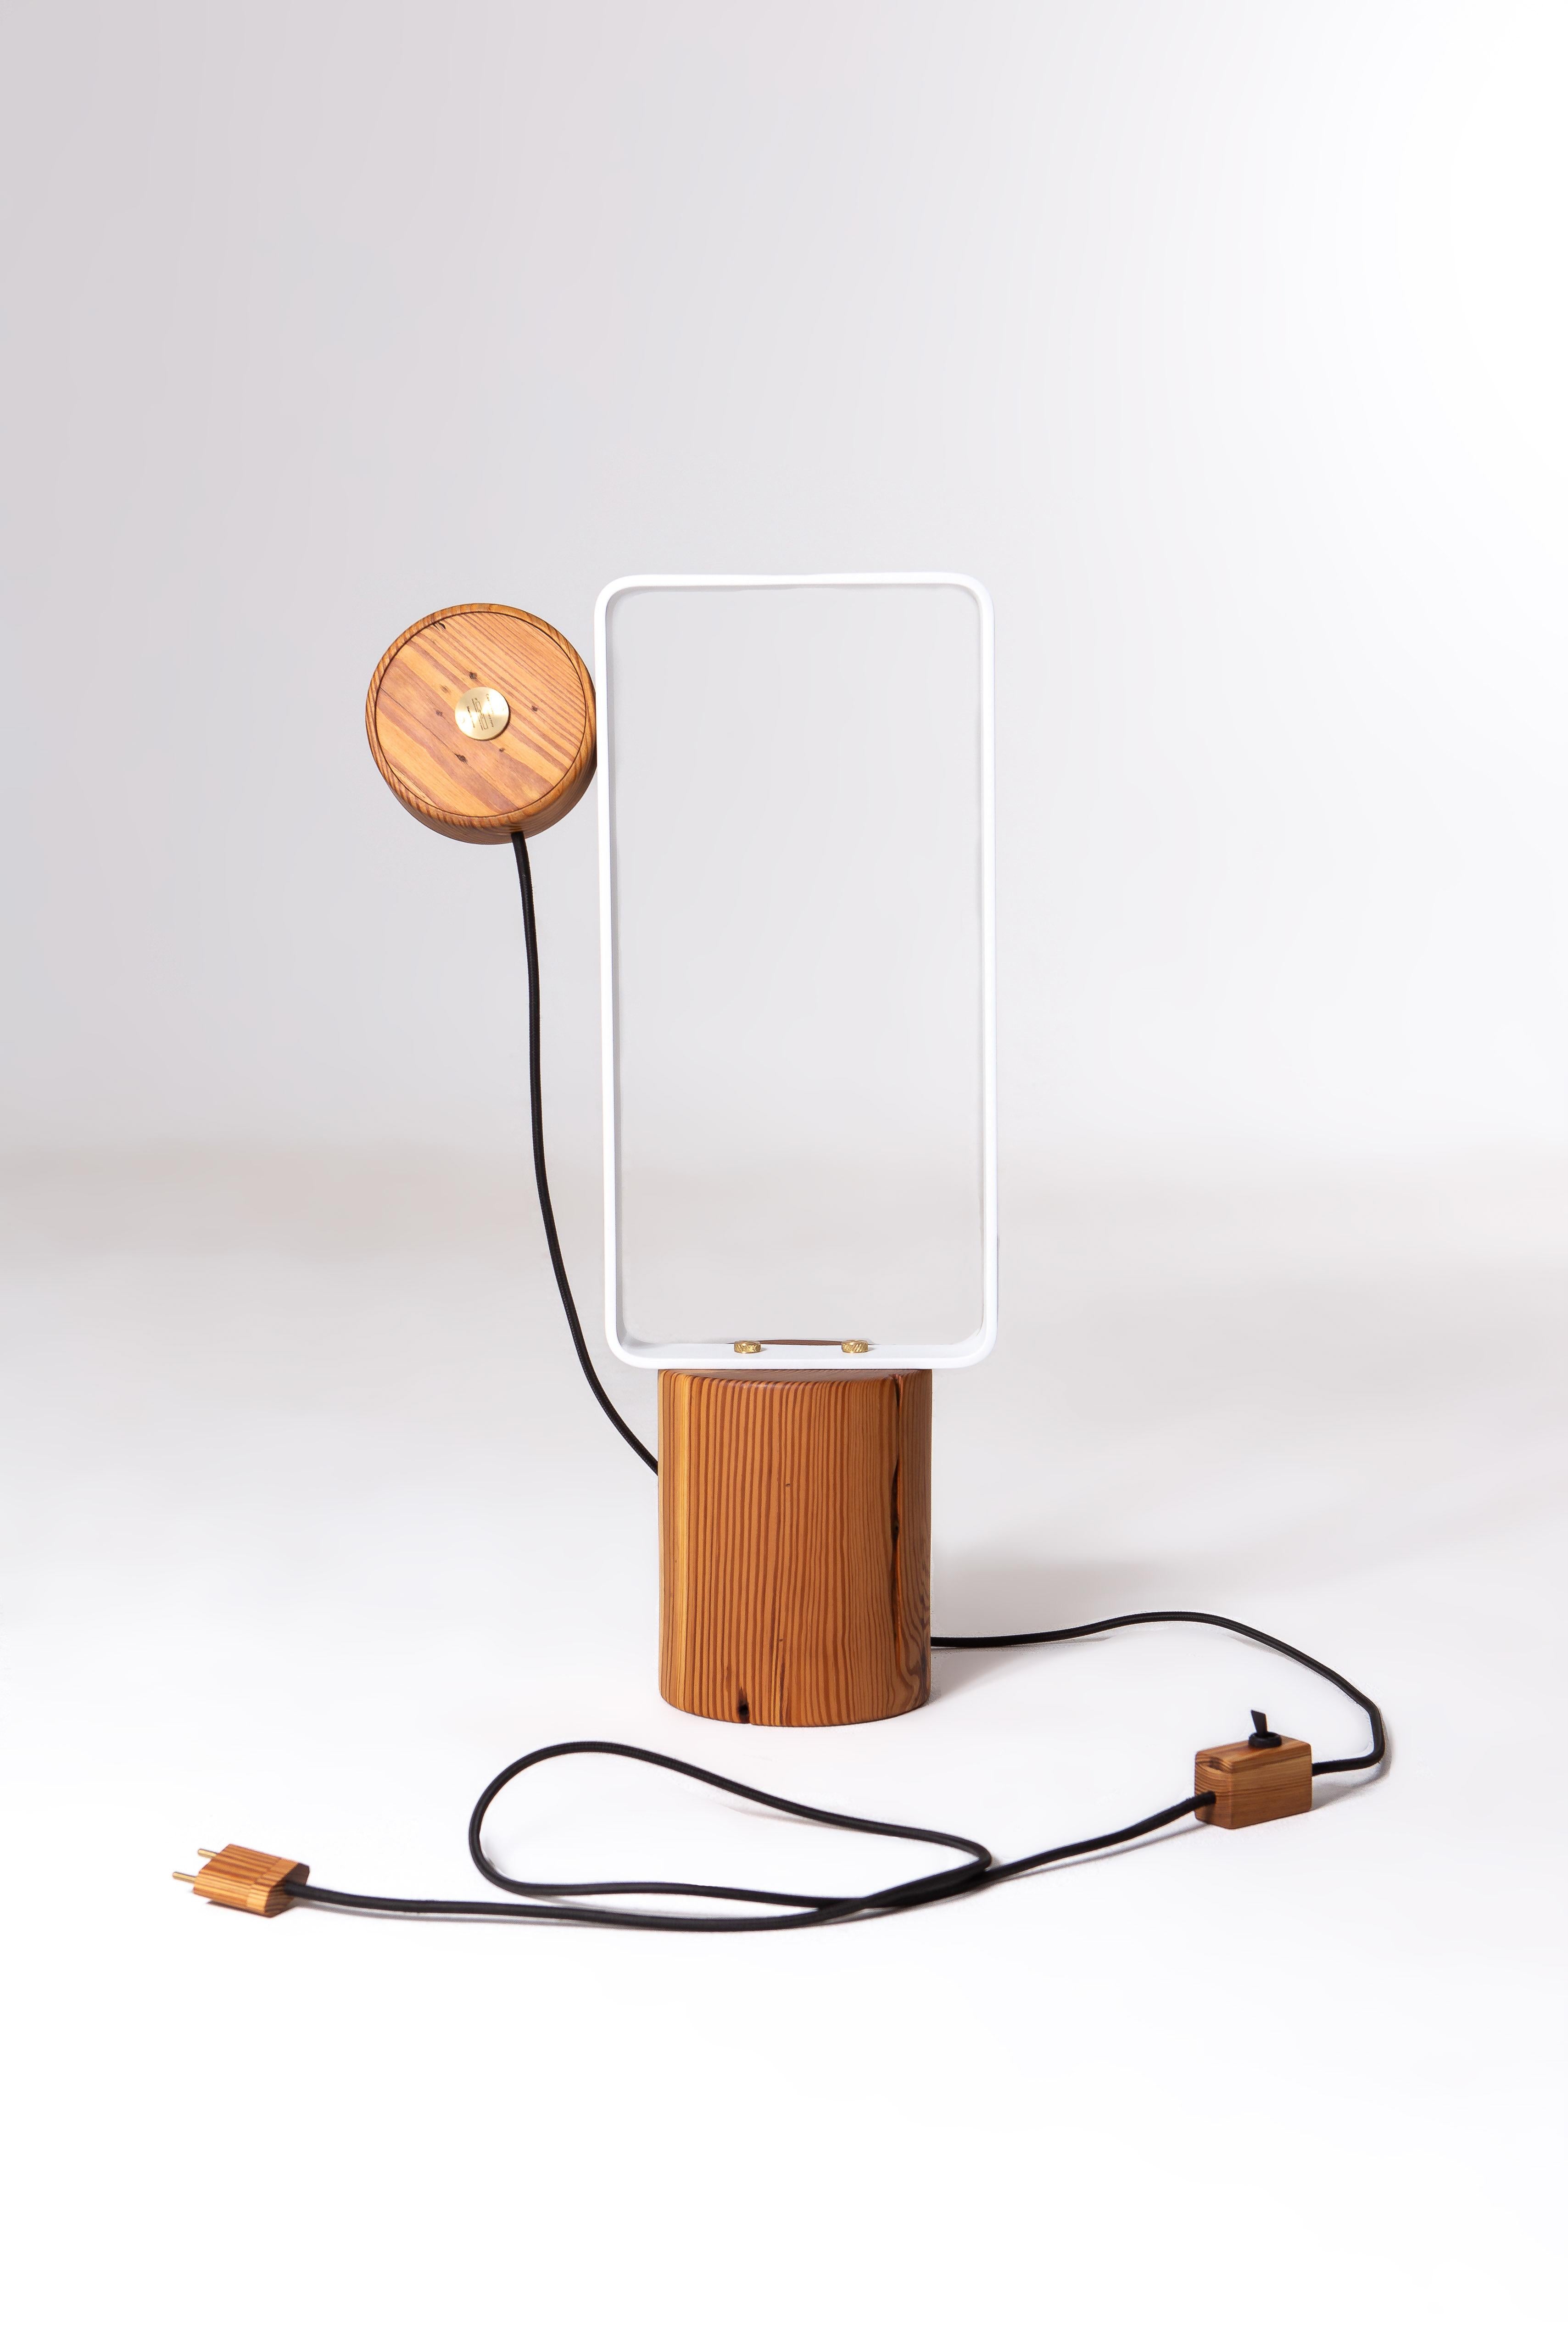 Hand-Crafted Minimalist Brazilian Handcrafted Lamp ''Ponta'' by Dimitrih Correa For Sale